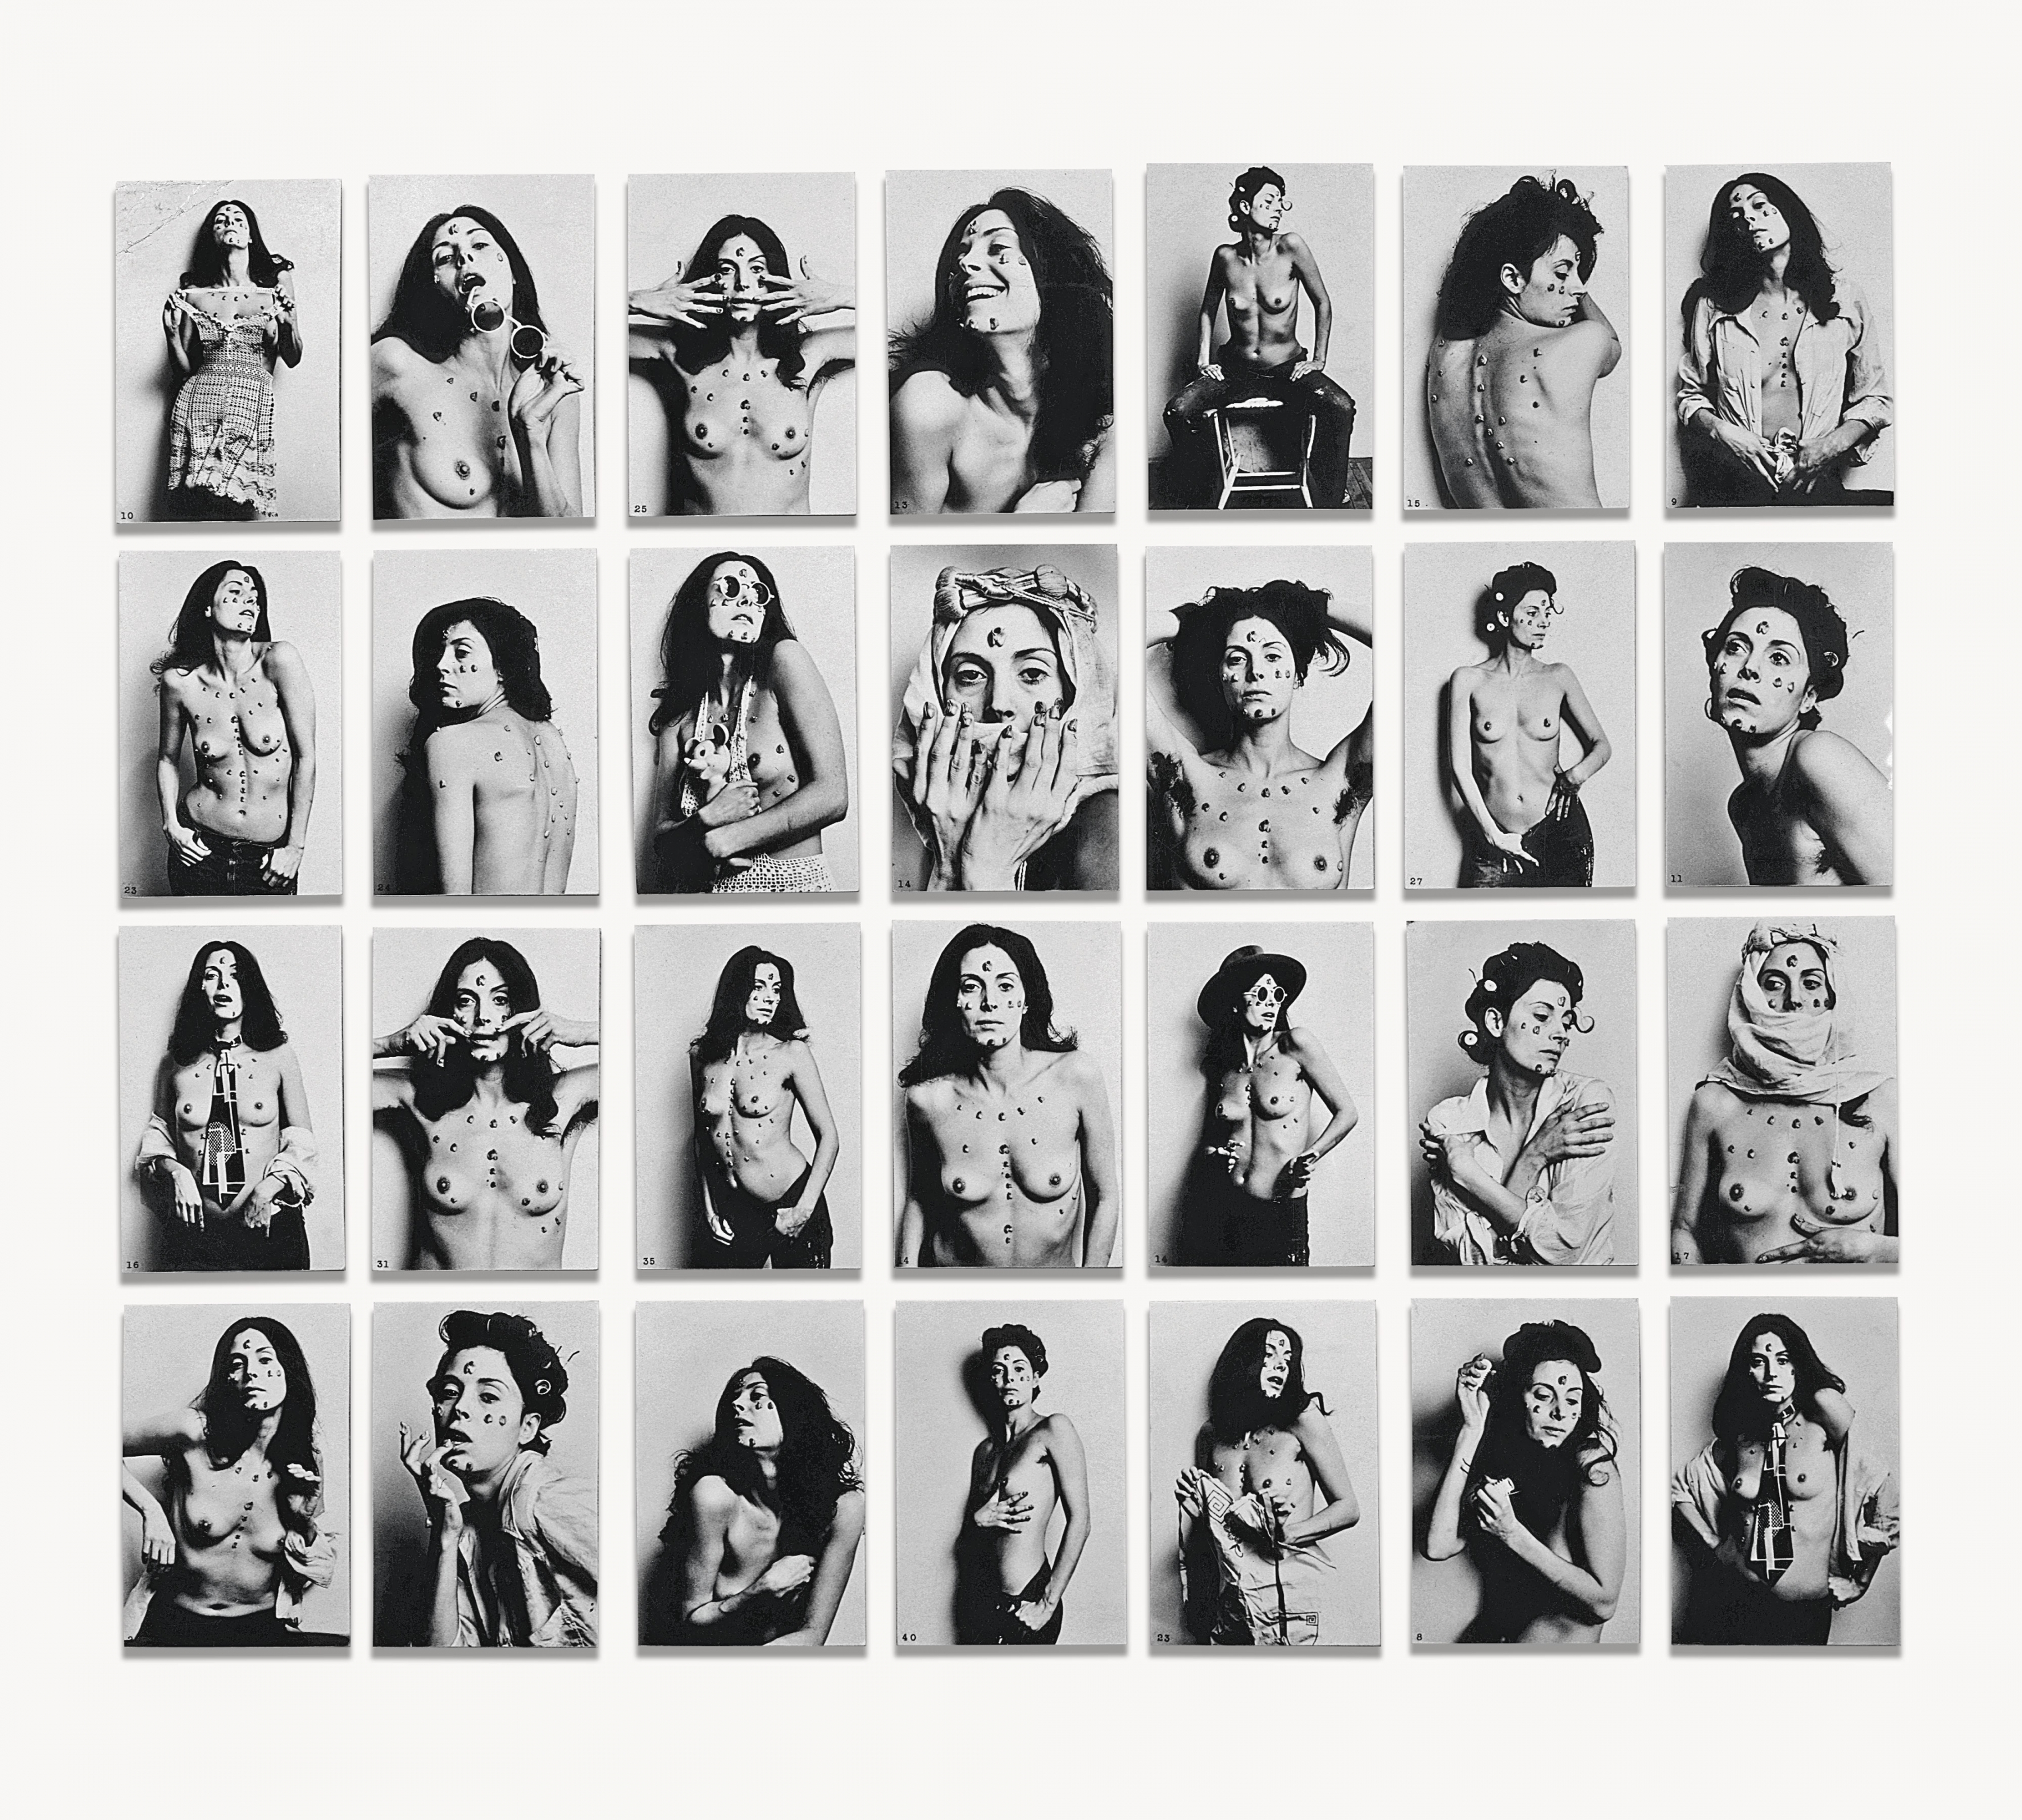 [FIG. 4]

Hannah Wilke

S.O.S. Starification Object Series, An Adult Game of Mastication, 1974 (detail)

Twenty-eight black and white photographs, 7 &amp;times; 5 inches each (17.8 &amp;times; 12.7 cm), framed together in installation of game box, photographs, and game instructions

Mus&amp;eacute;e National d&amp;rsquo;Art Moderne,

Centre Georges Pompidou, Paris

Gift of the Centre Pompidou Foundation, 2007 and partial gift of Marsie, Emanuelle, Damon and Andrew Scharlatt, Hannah Wilke Collection &amp;amp; Archive, Los Angeles, to the Centre Pompidou Foundation, 2007.

Image courtesy Hannah Wilke Collection &amp;amp; Archive,

Los Angeles.